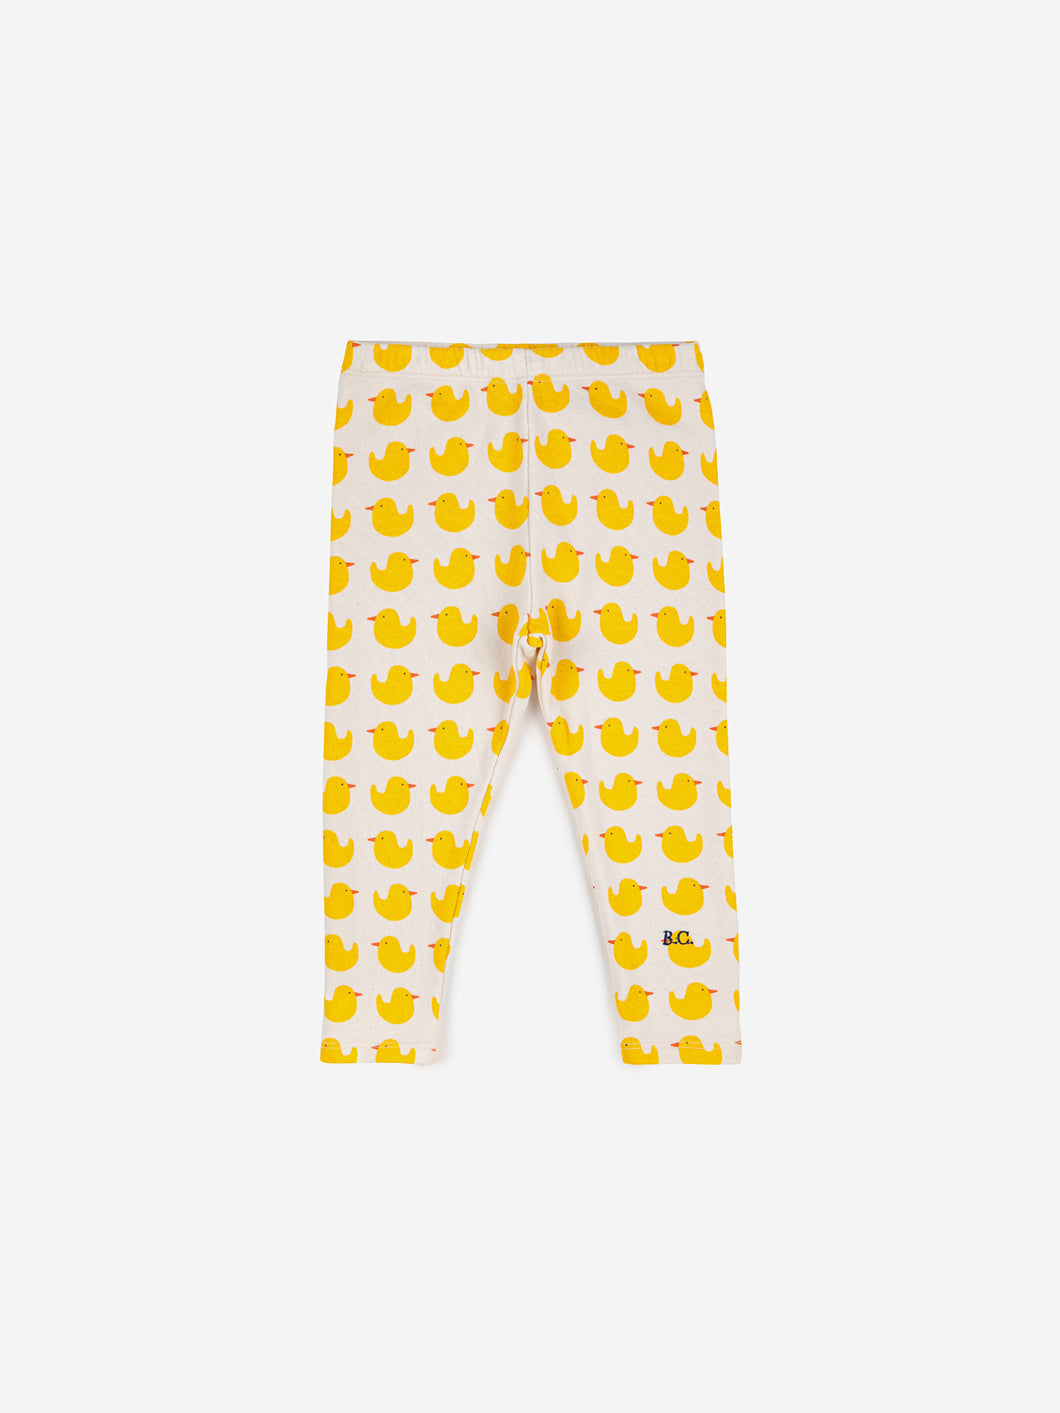 Baby Rubber Duck all over leggings 23AW / ボボショーズ ベビーレギンス ひよこ柄